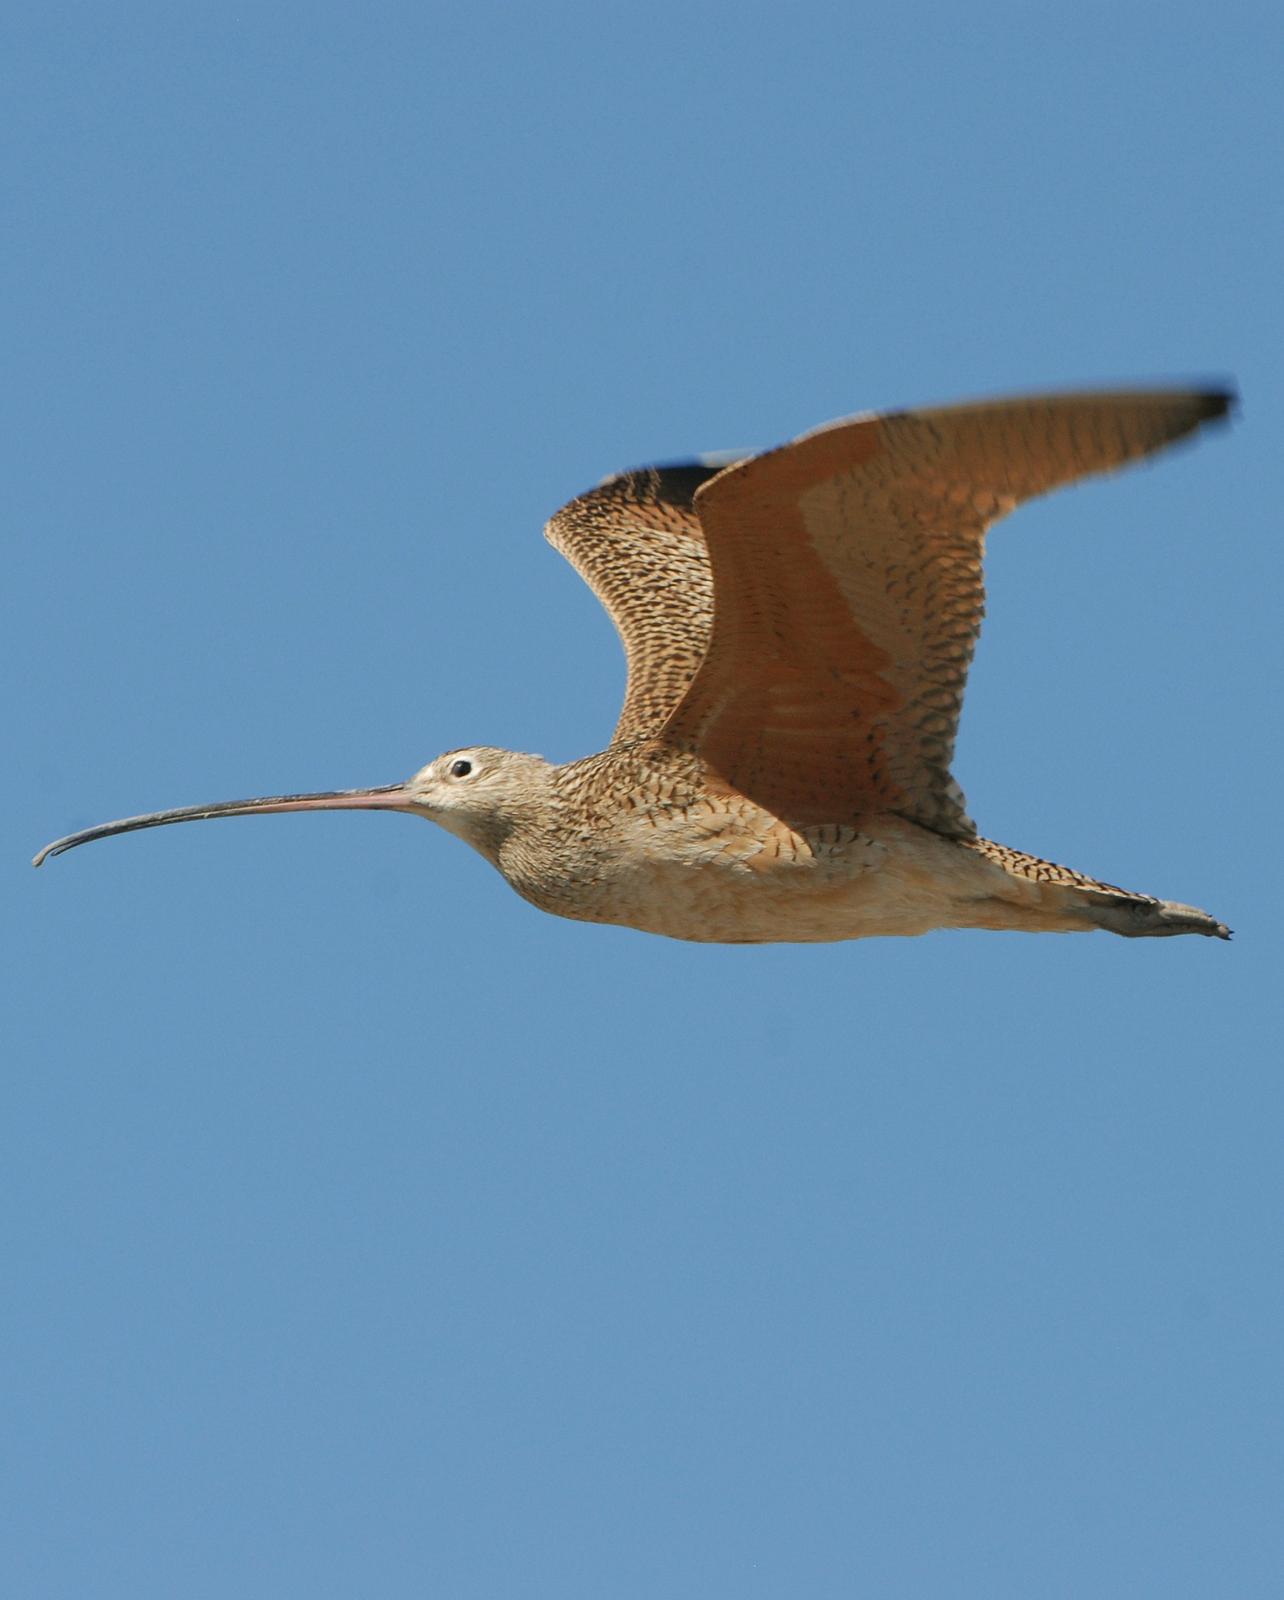 Long-billed Curlew Photo by David Hollie